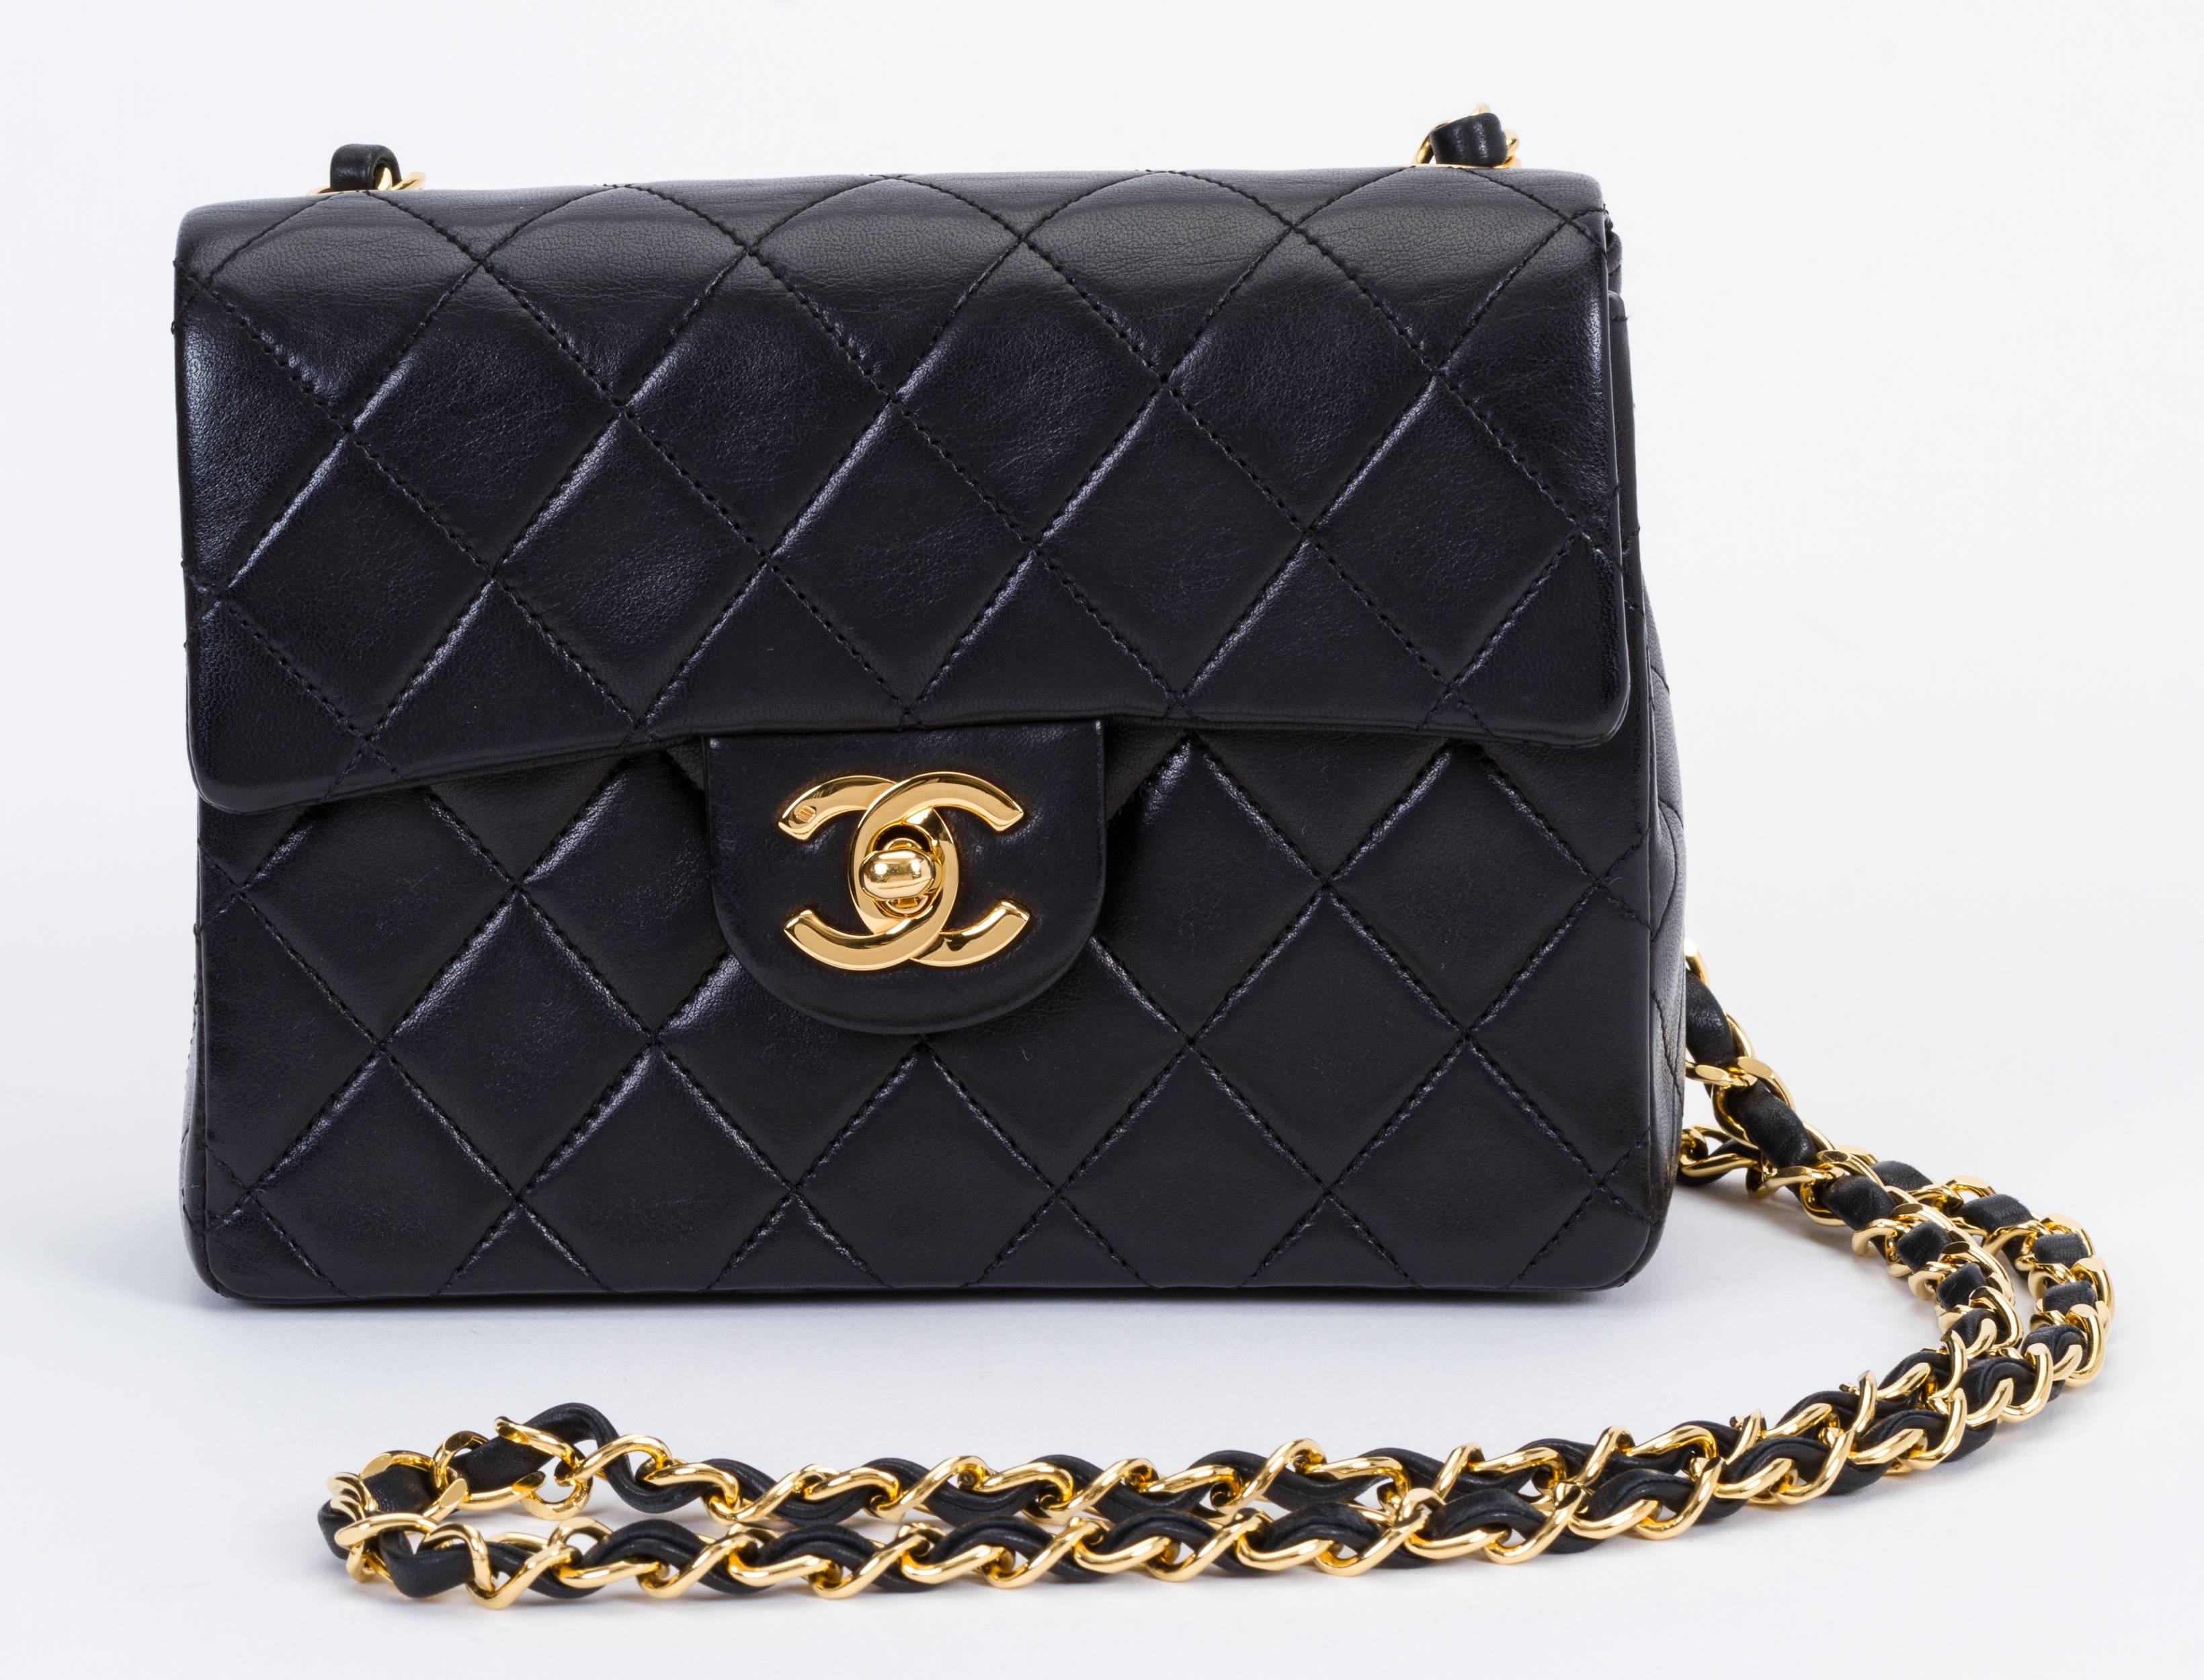 Chanel mini classic black lambskin quilted flap with gold tone hardware. Shoulder drop 21